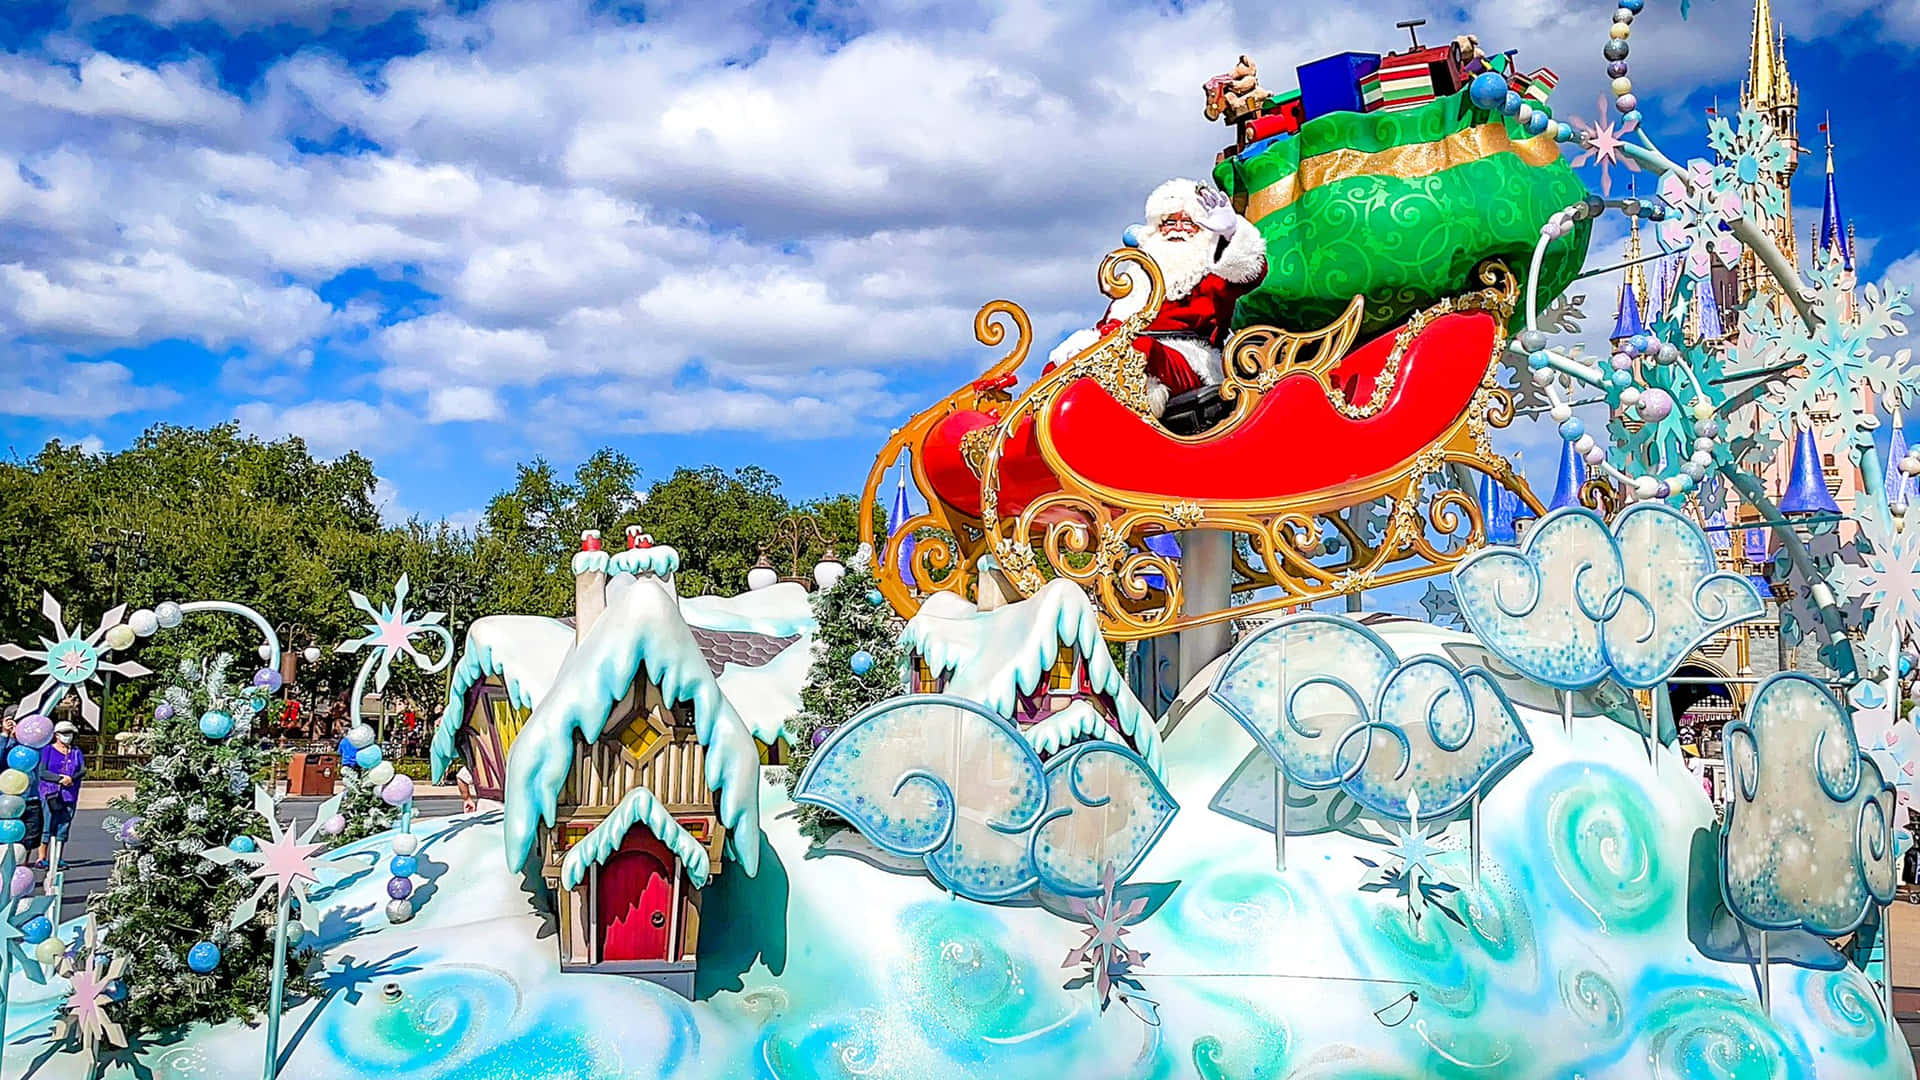 A Float Decorated With Santa Claus And Snowflakes